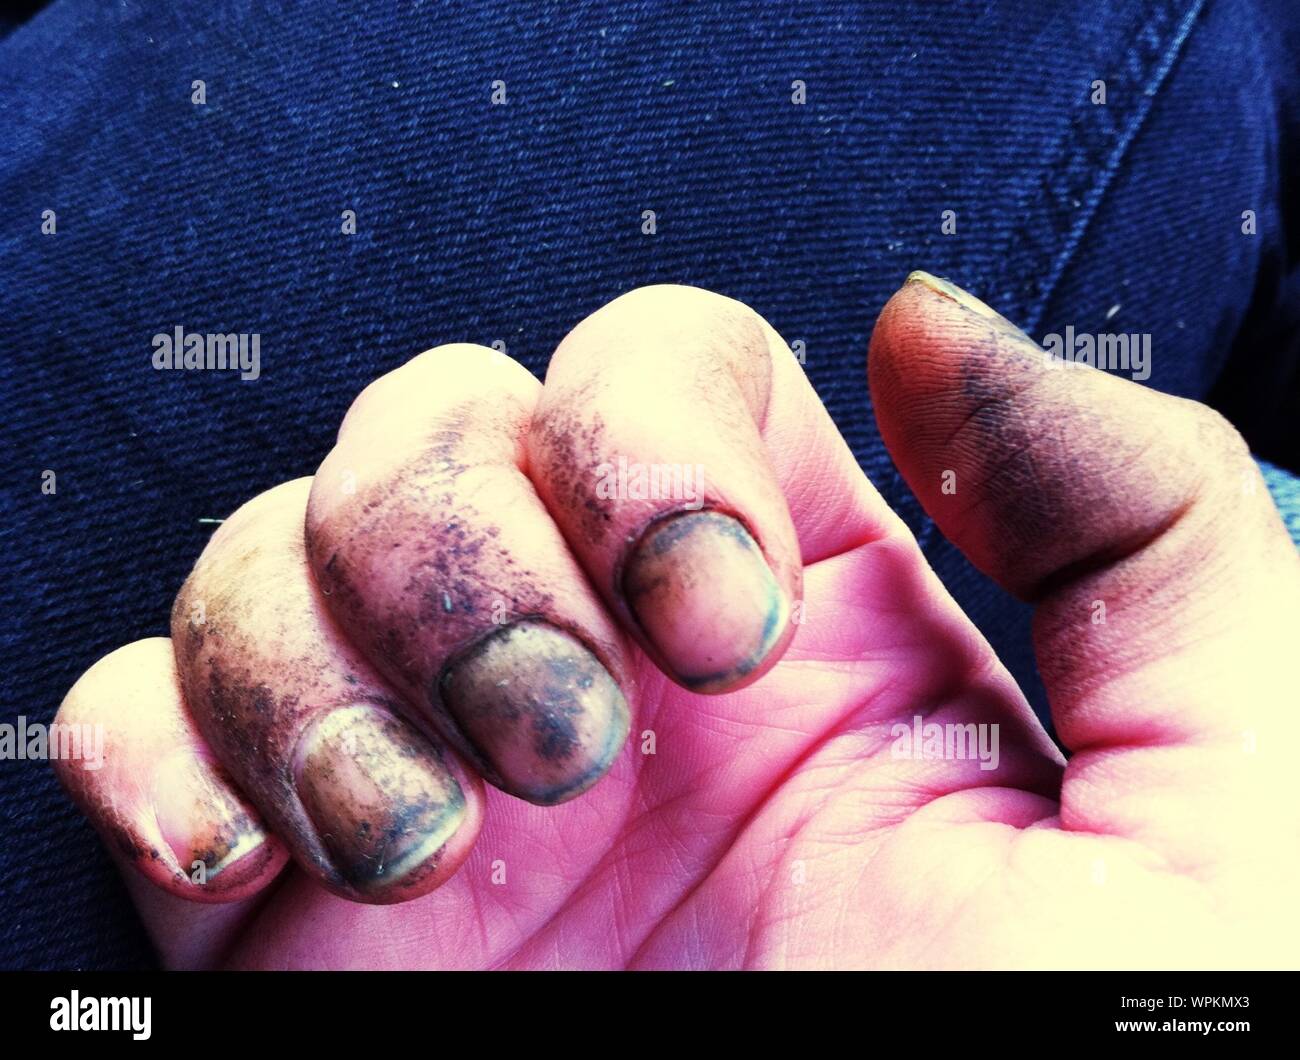 Close Up Of Persons Hand With Dirty Fingernails Stock Photo Alamy